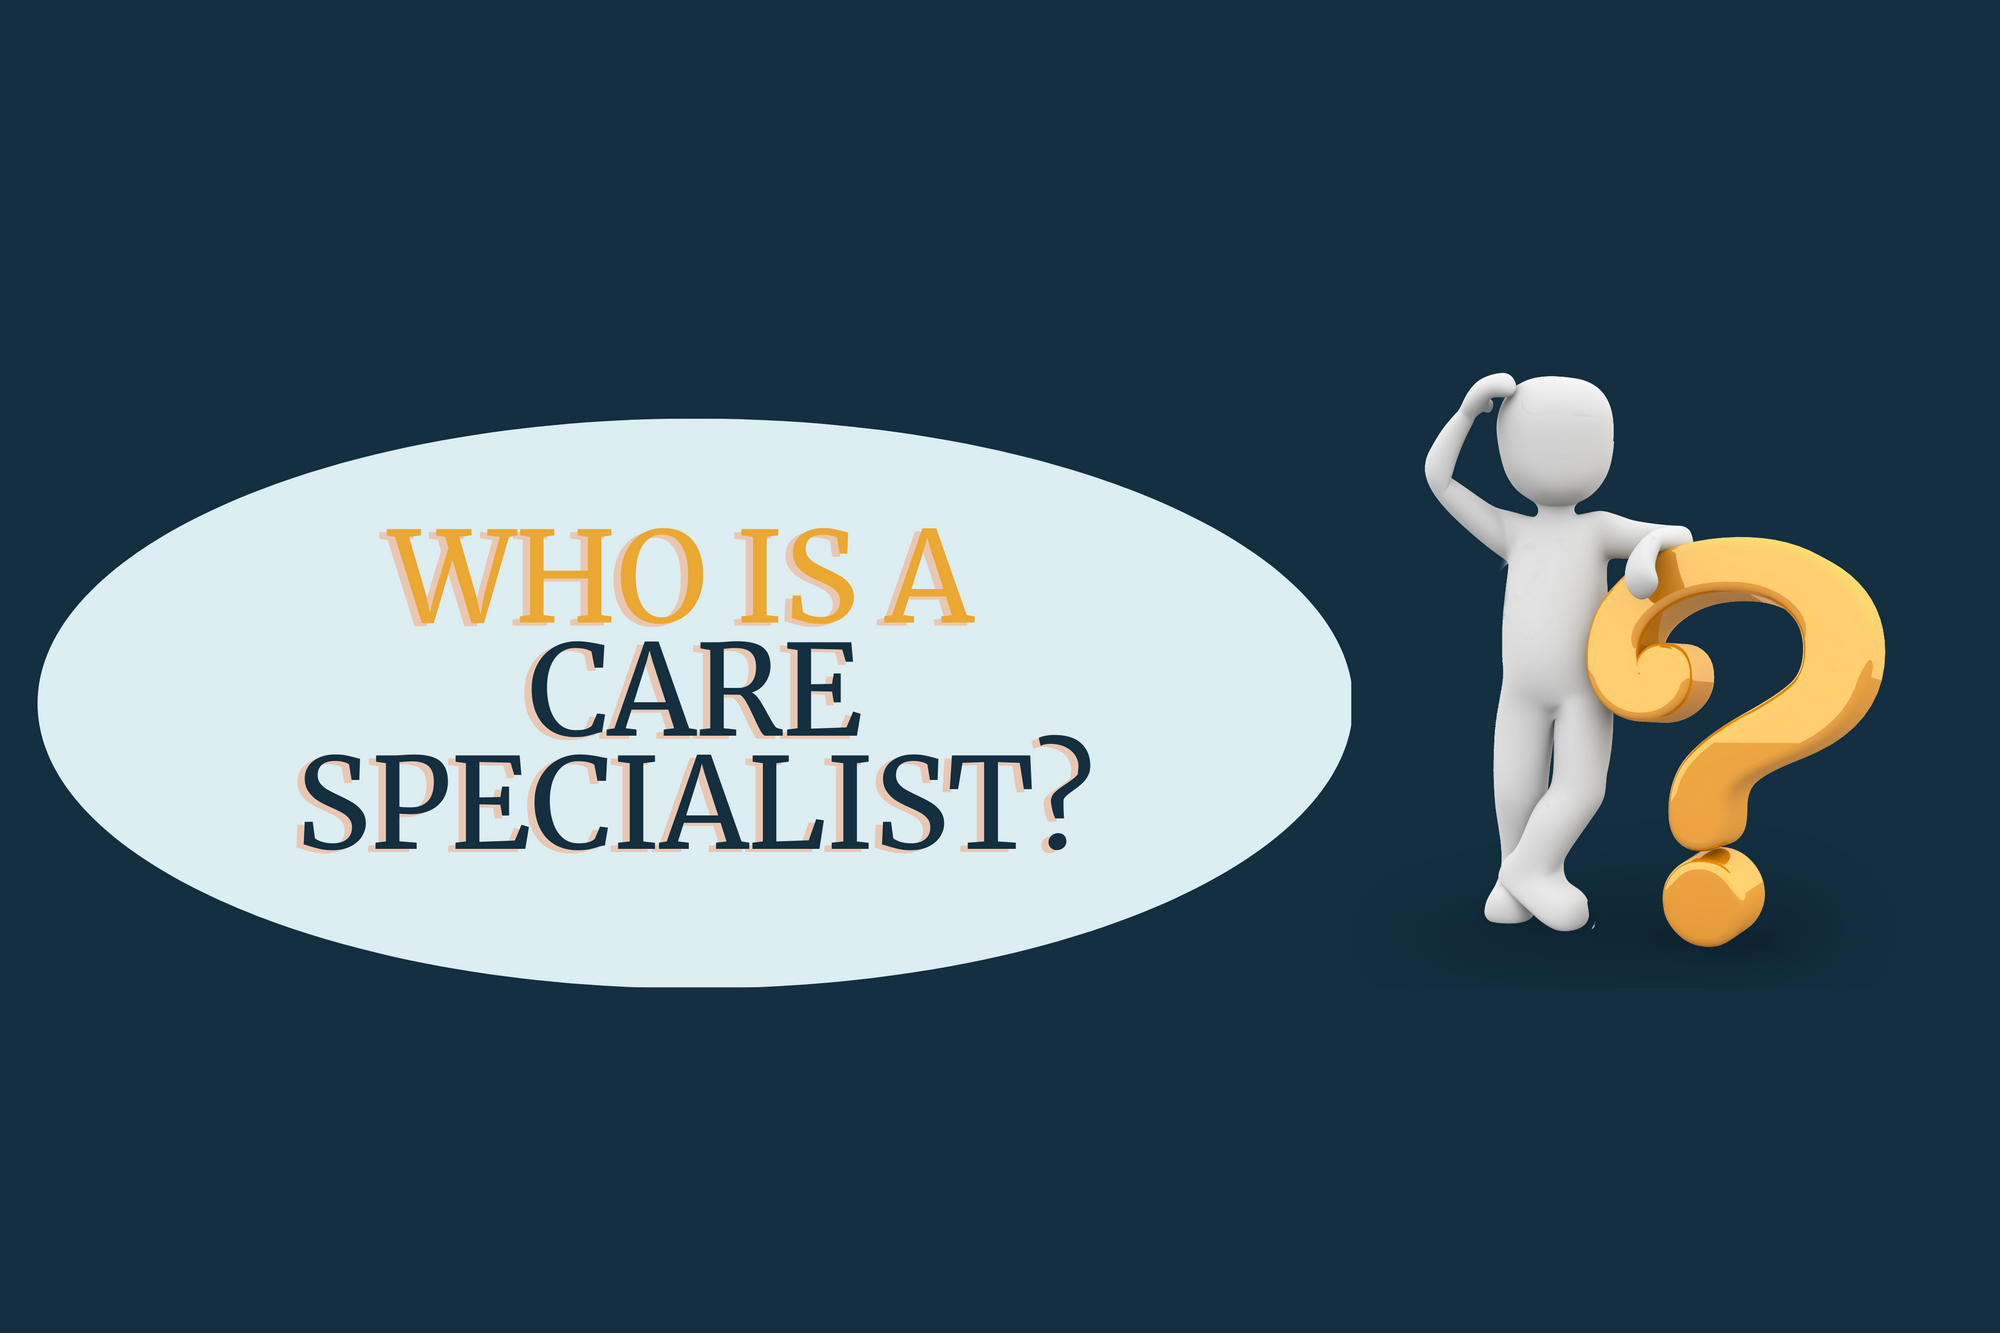 Who is a care specialist?